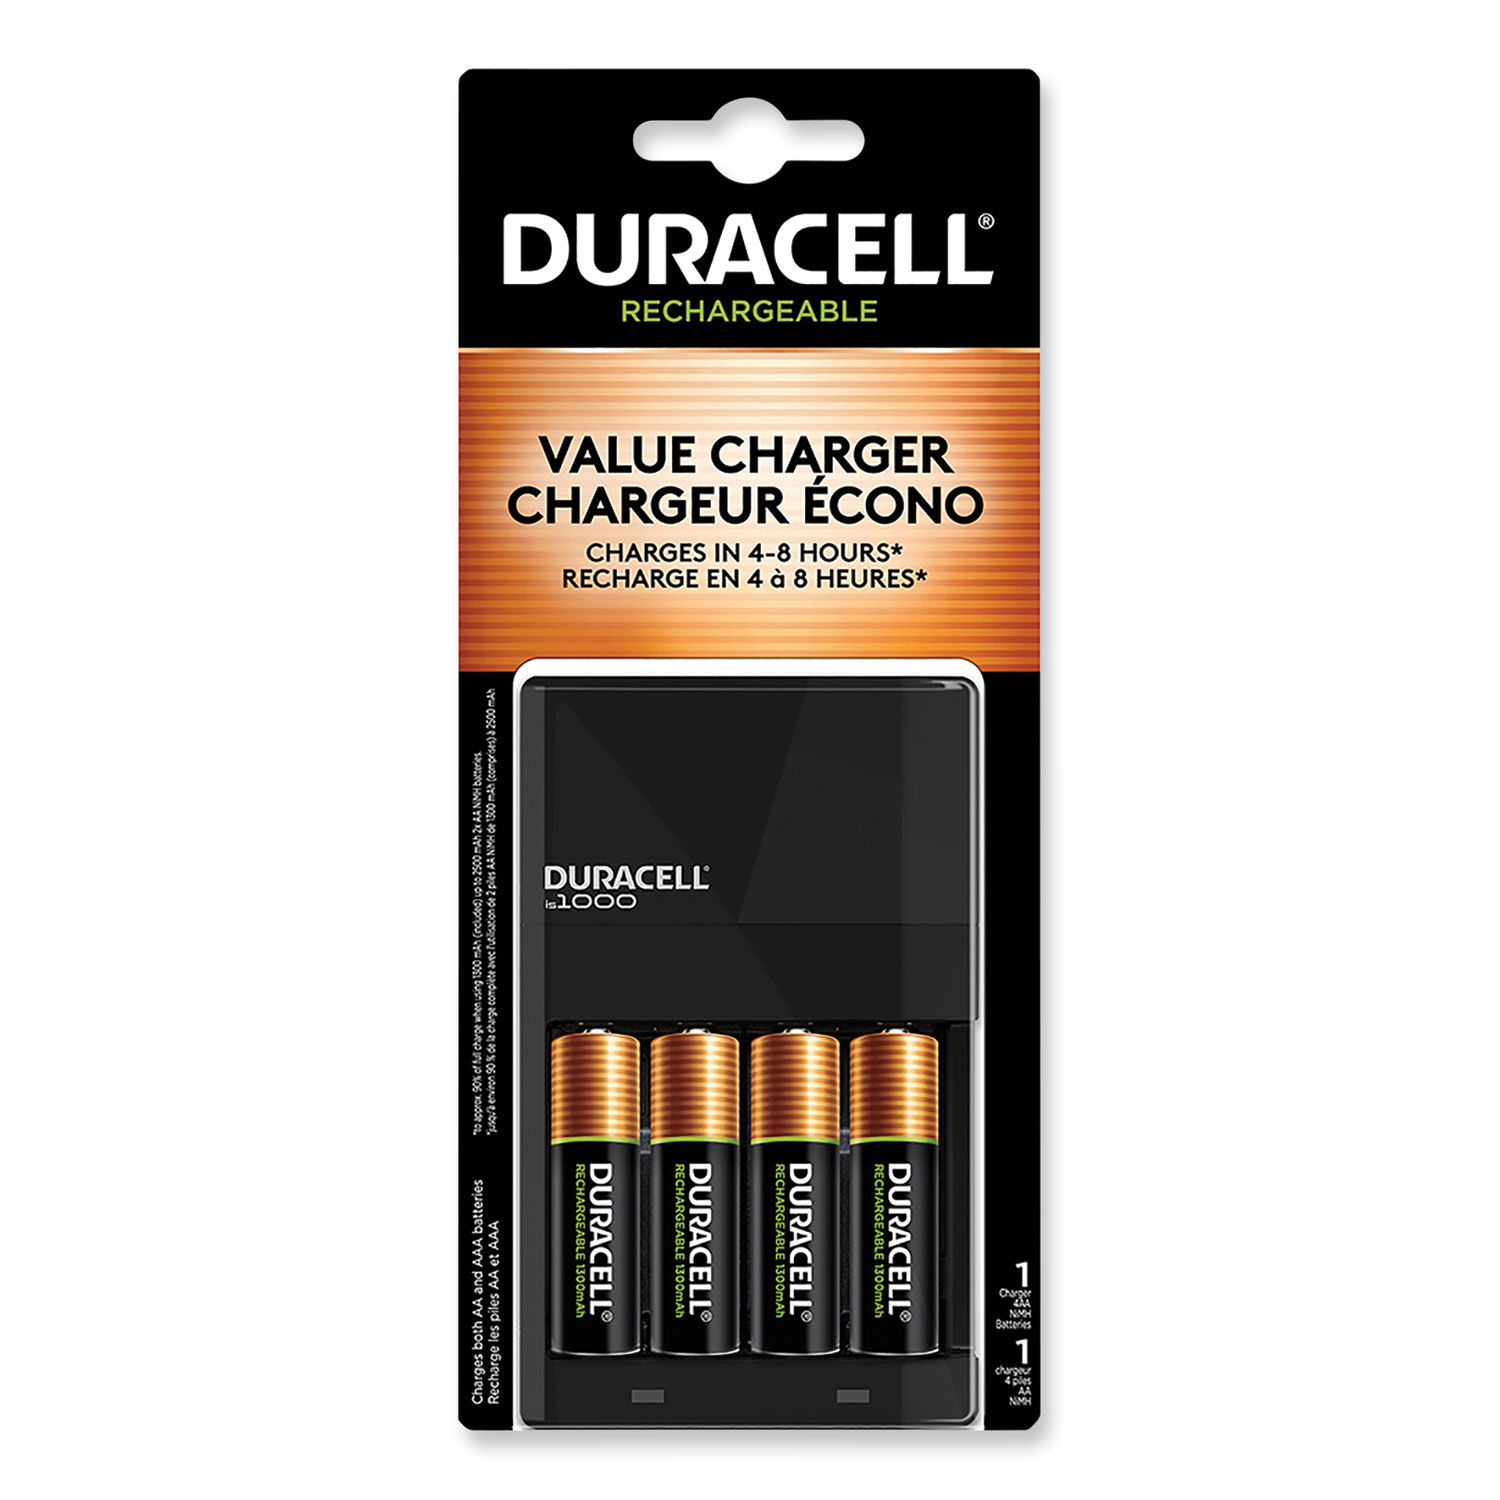 Chargeur universel avec 2 piles rechargeables AA, AAA - Piles